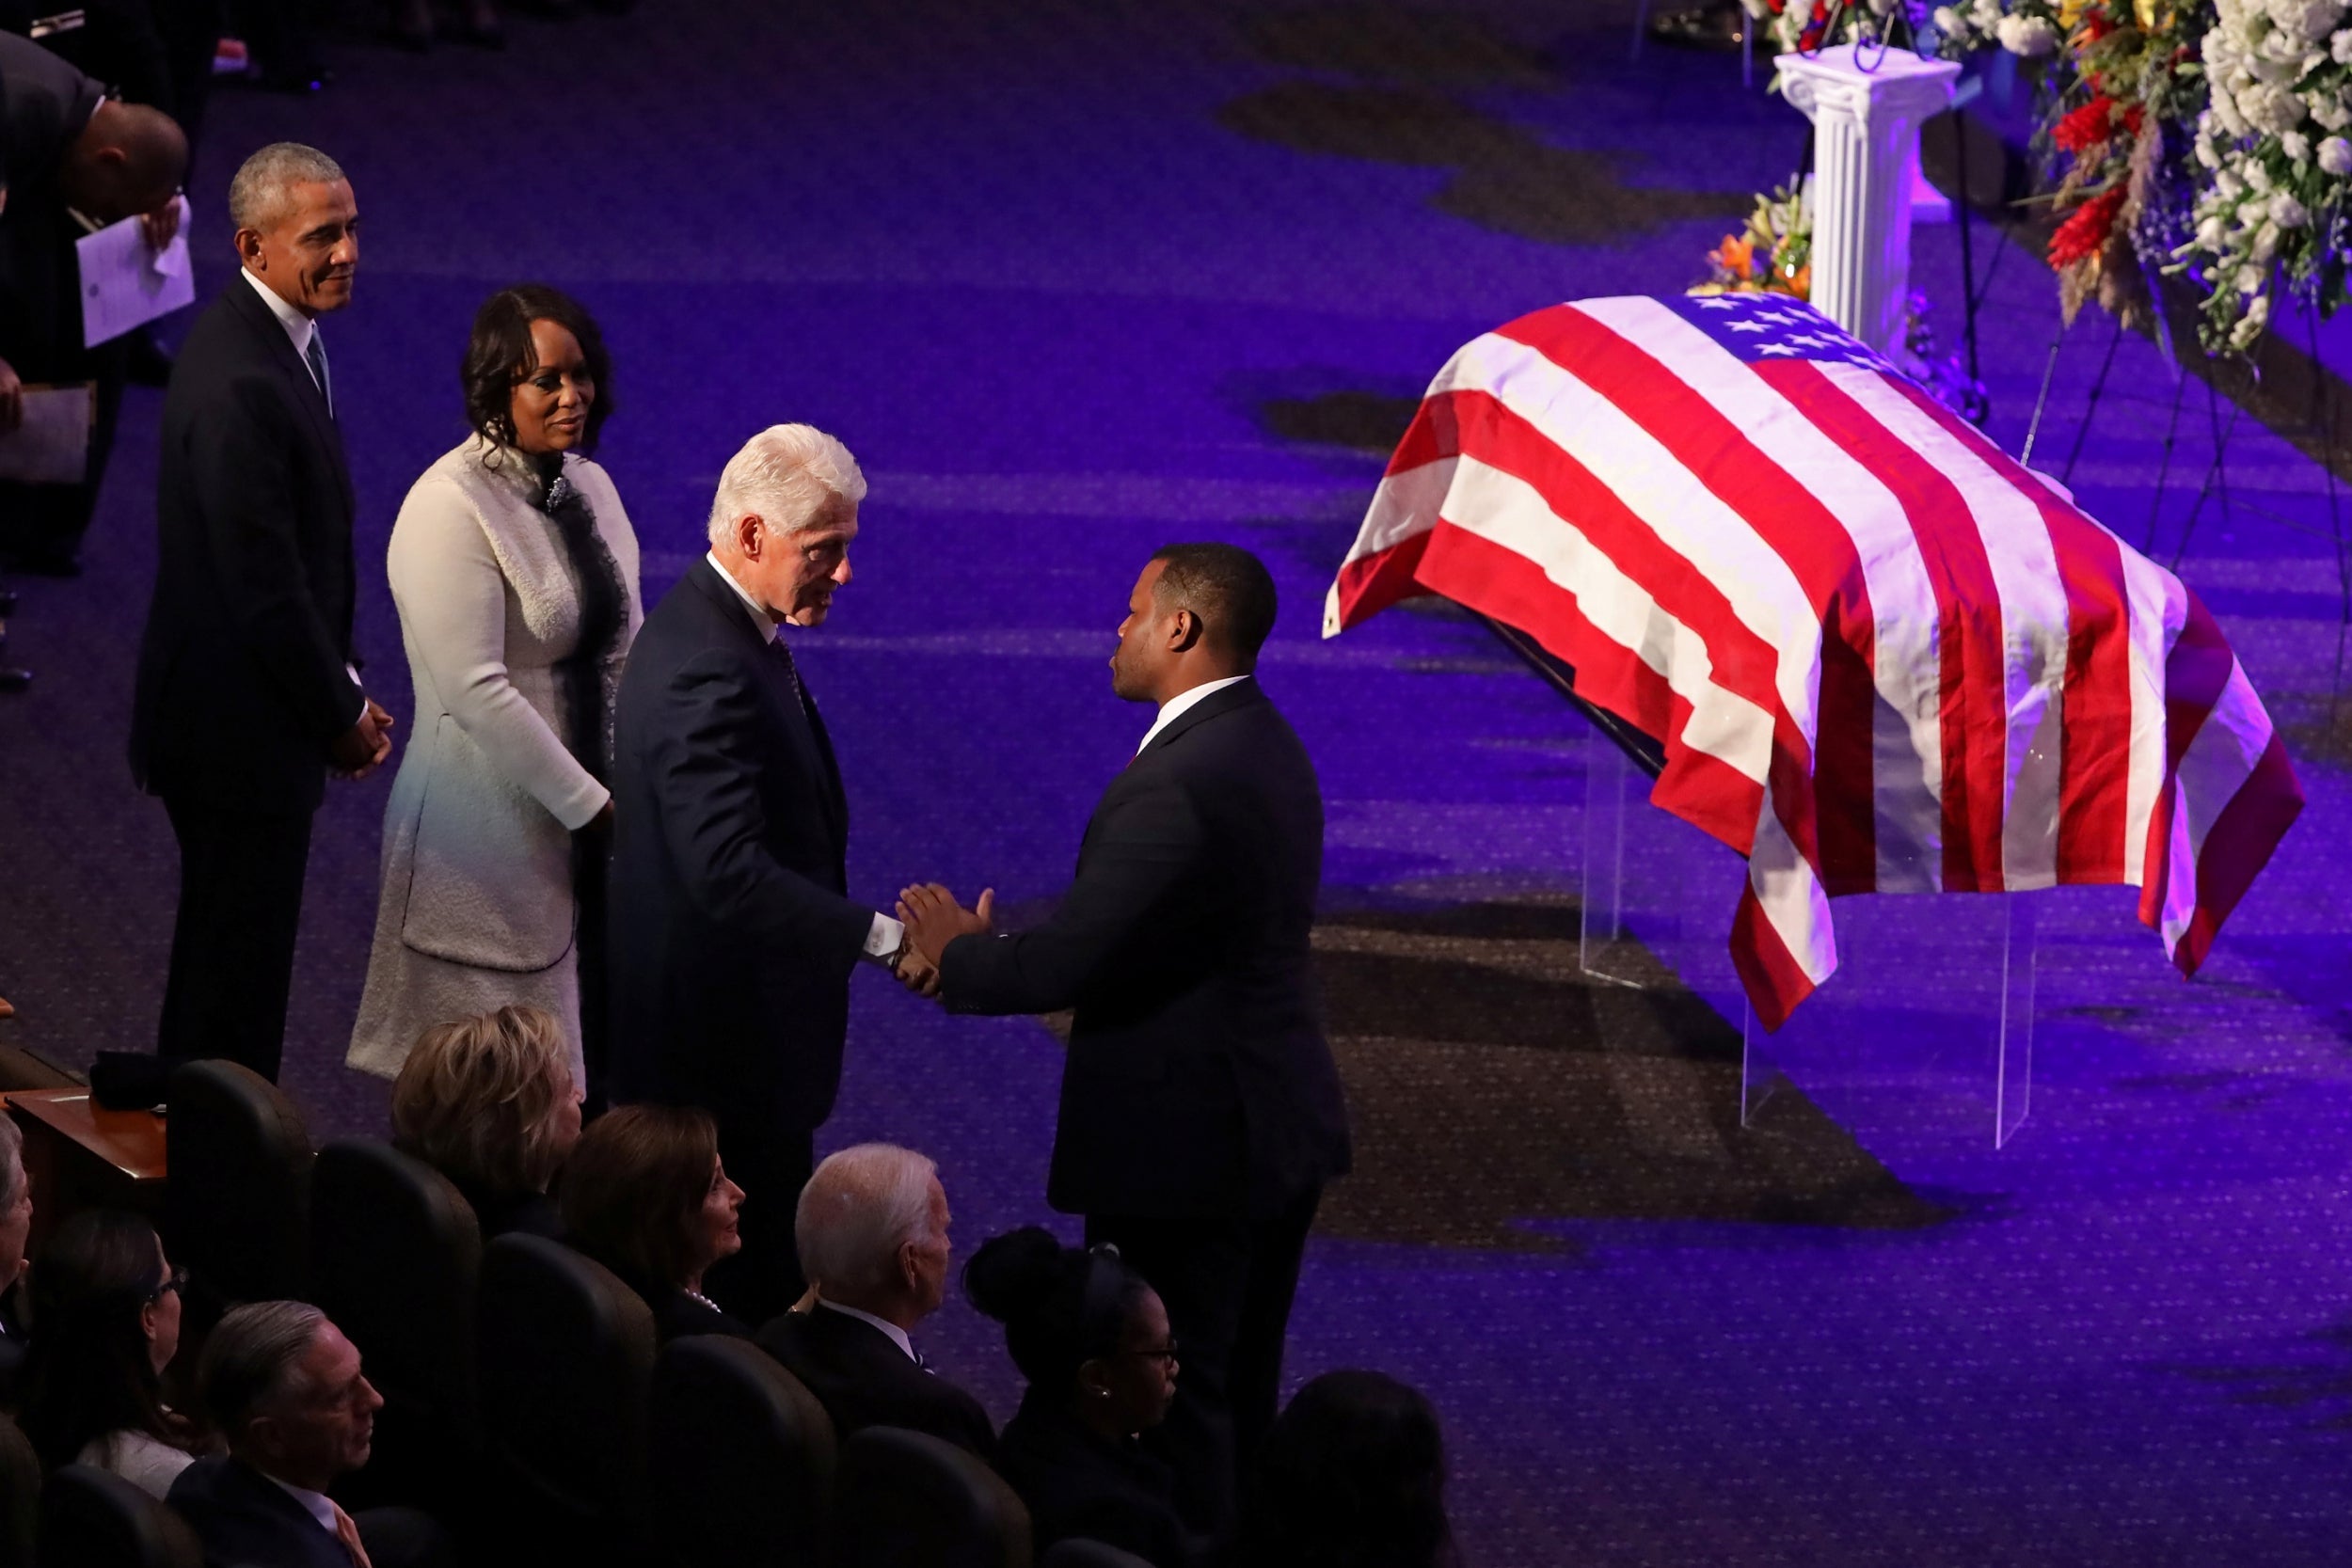 Amid the chaos in DC, Elijah Cummings' funeral provided a vital 'stop and think' moment for politicians